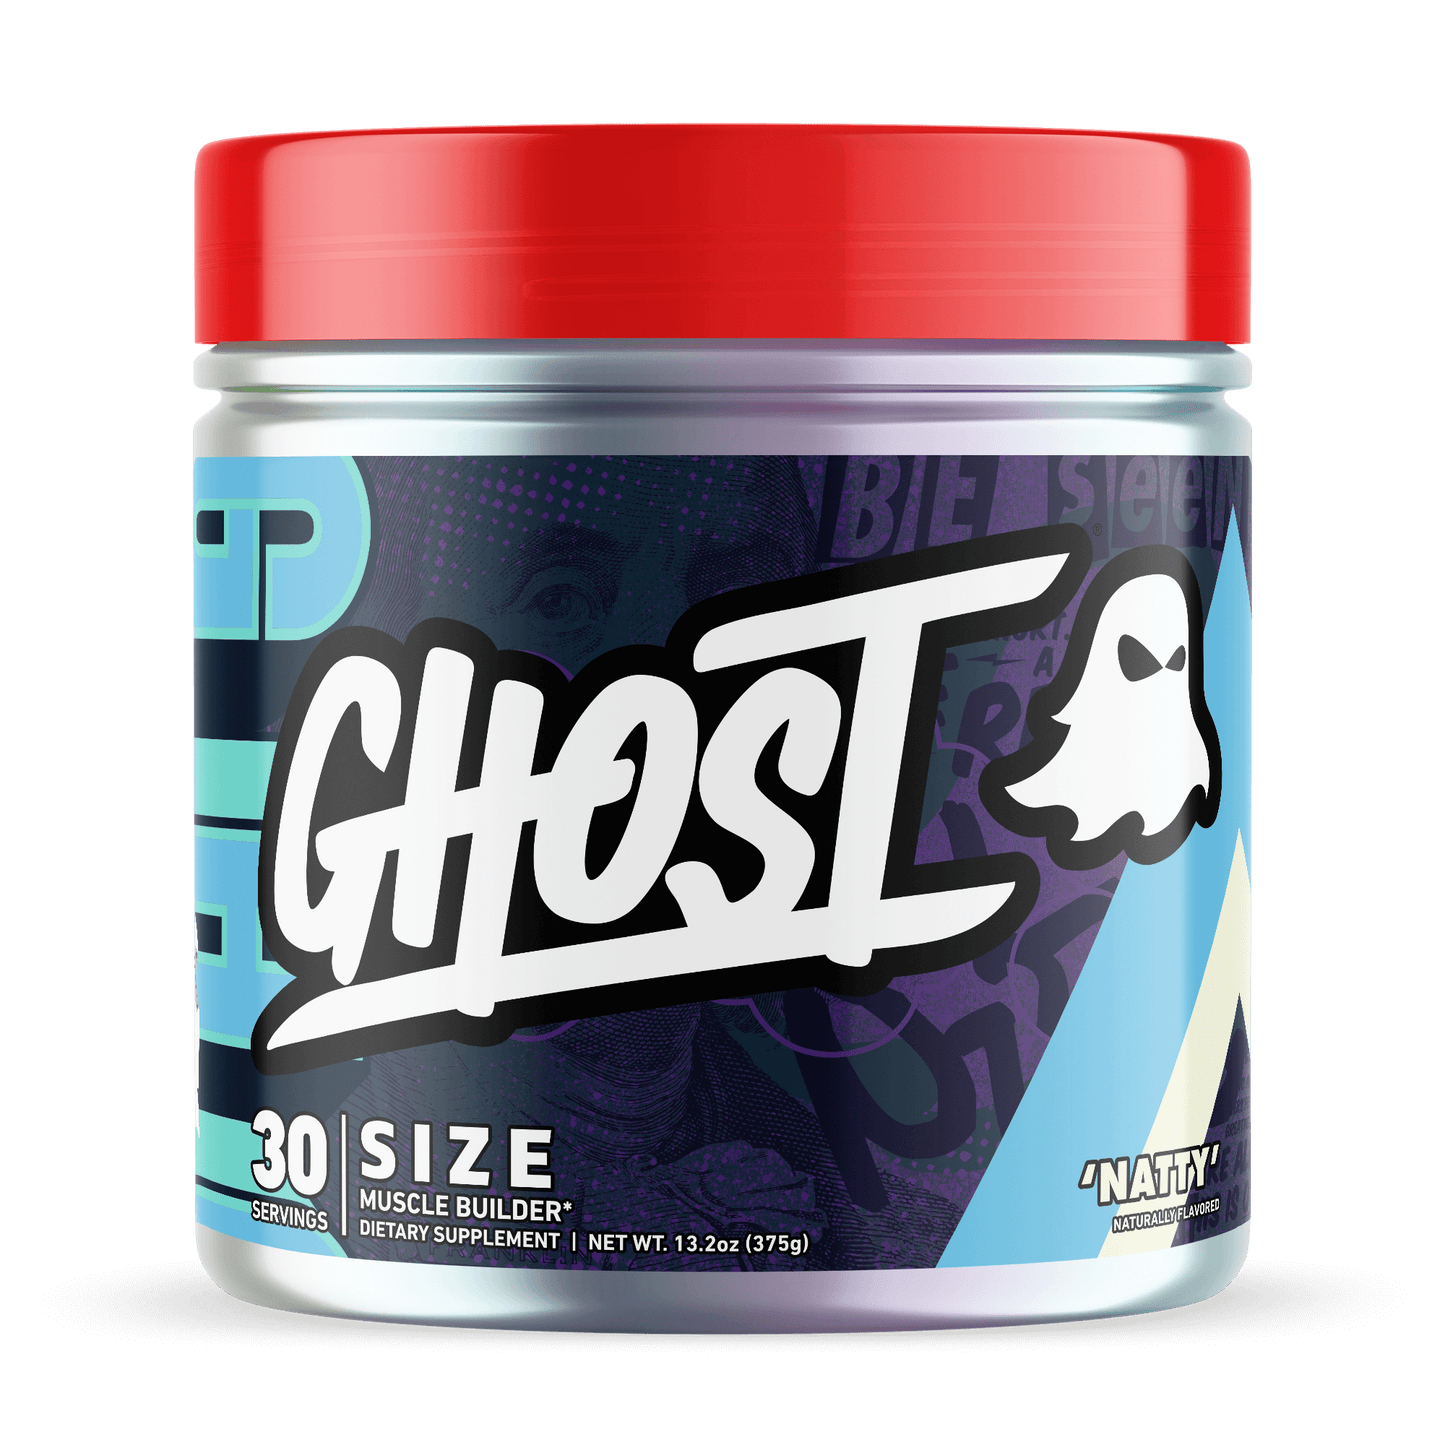 Ghost Size Size: 30 Svgs Flavour: Natty